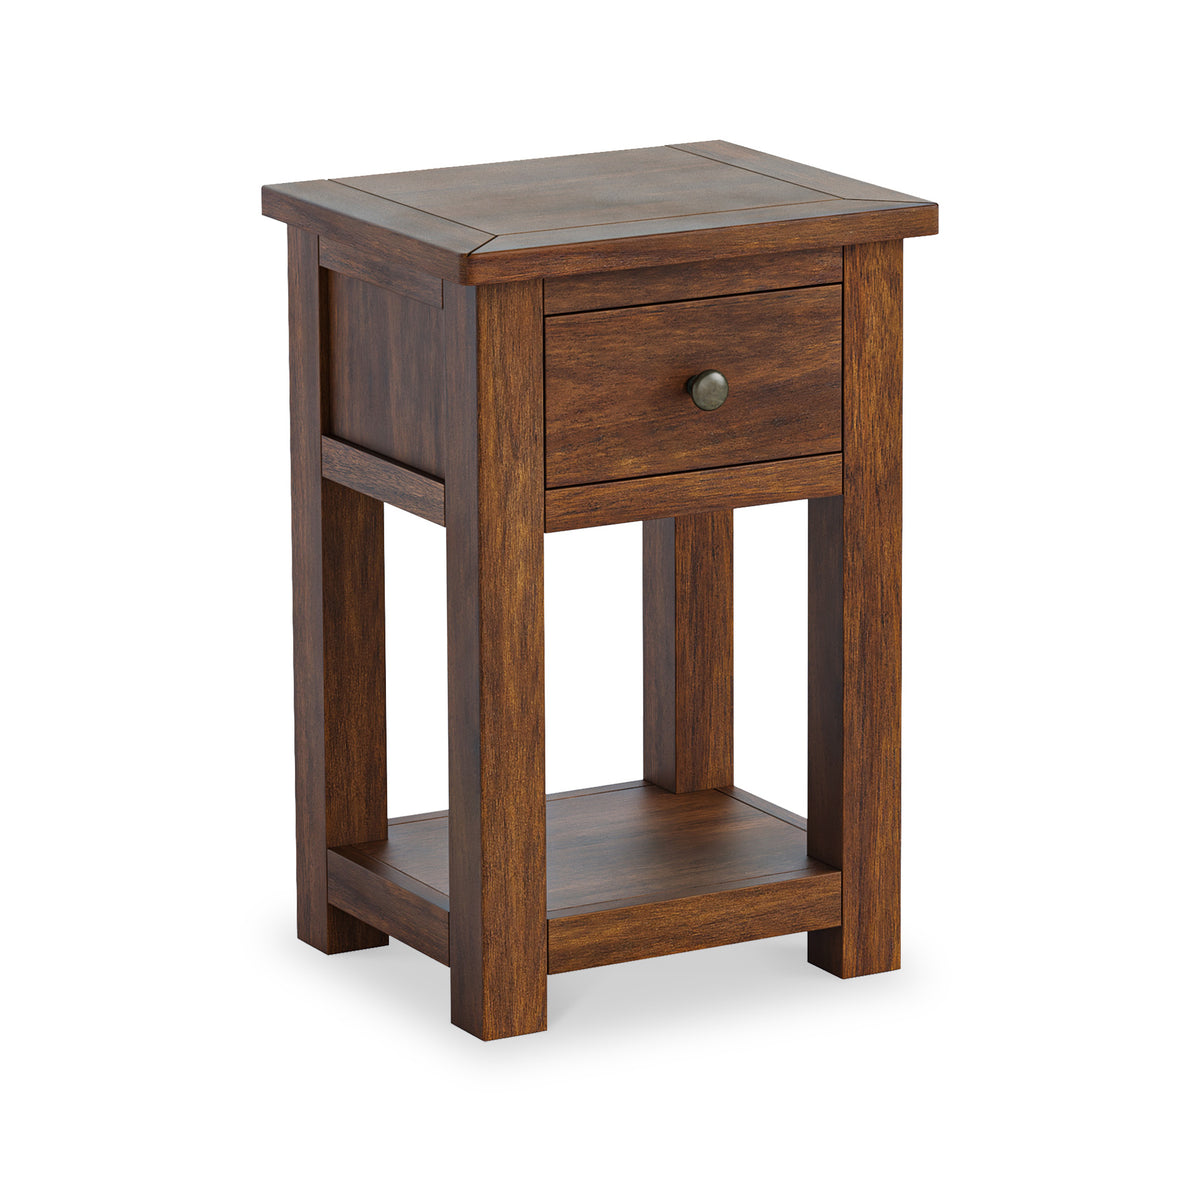 Duchy Acacia 1 Drawer Brown Bedside Table from Roseland Furniture